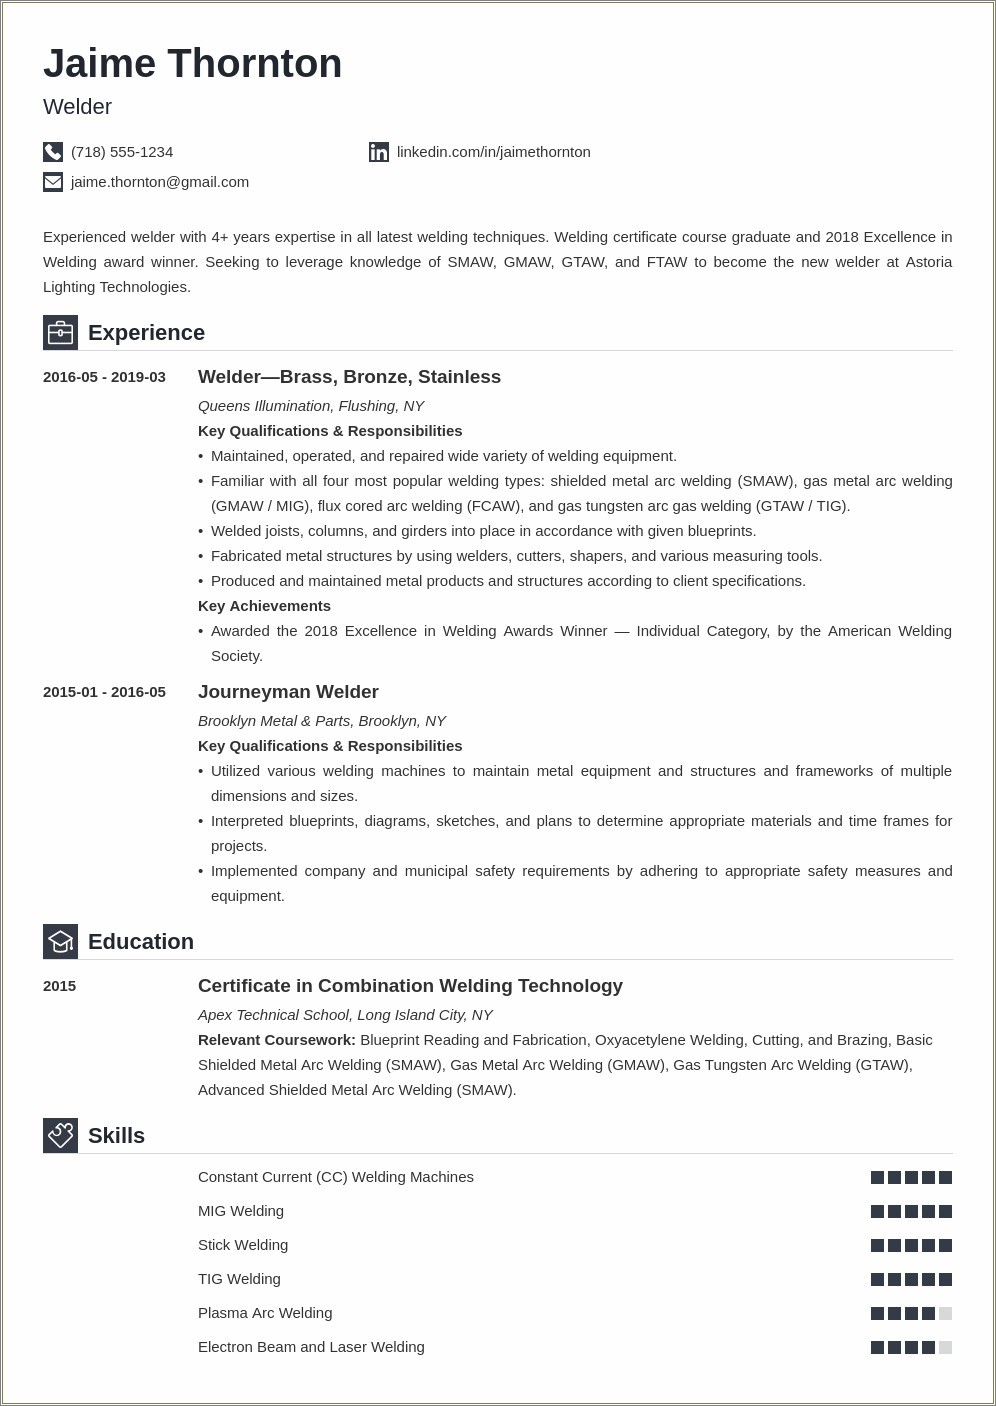 Resume Help For A Sheet Metal Worker